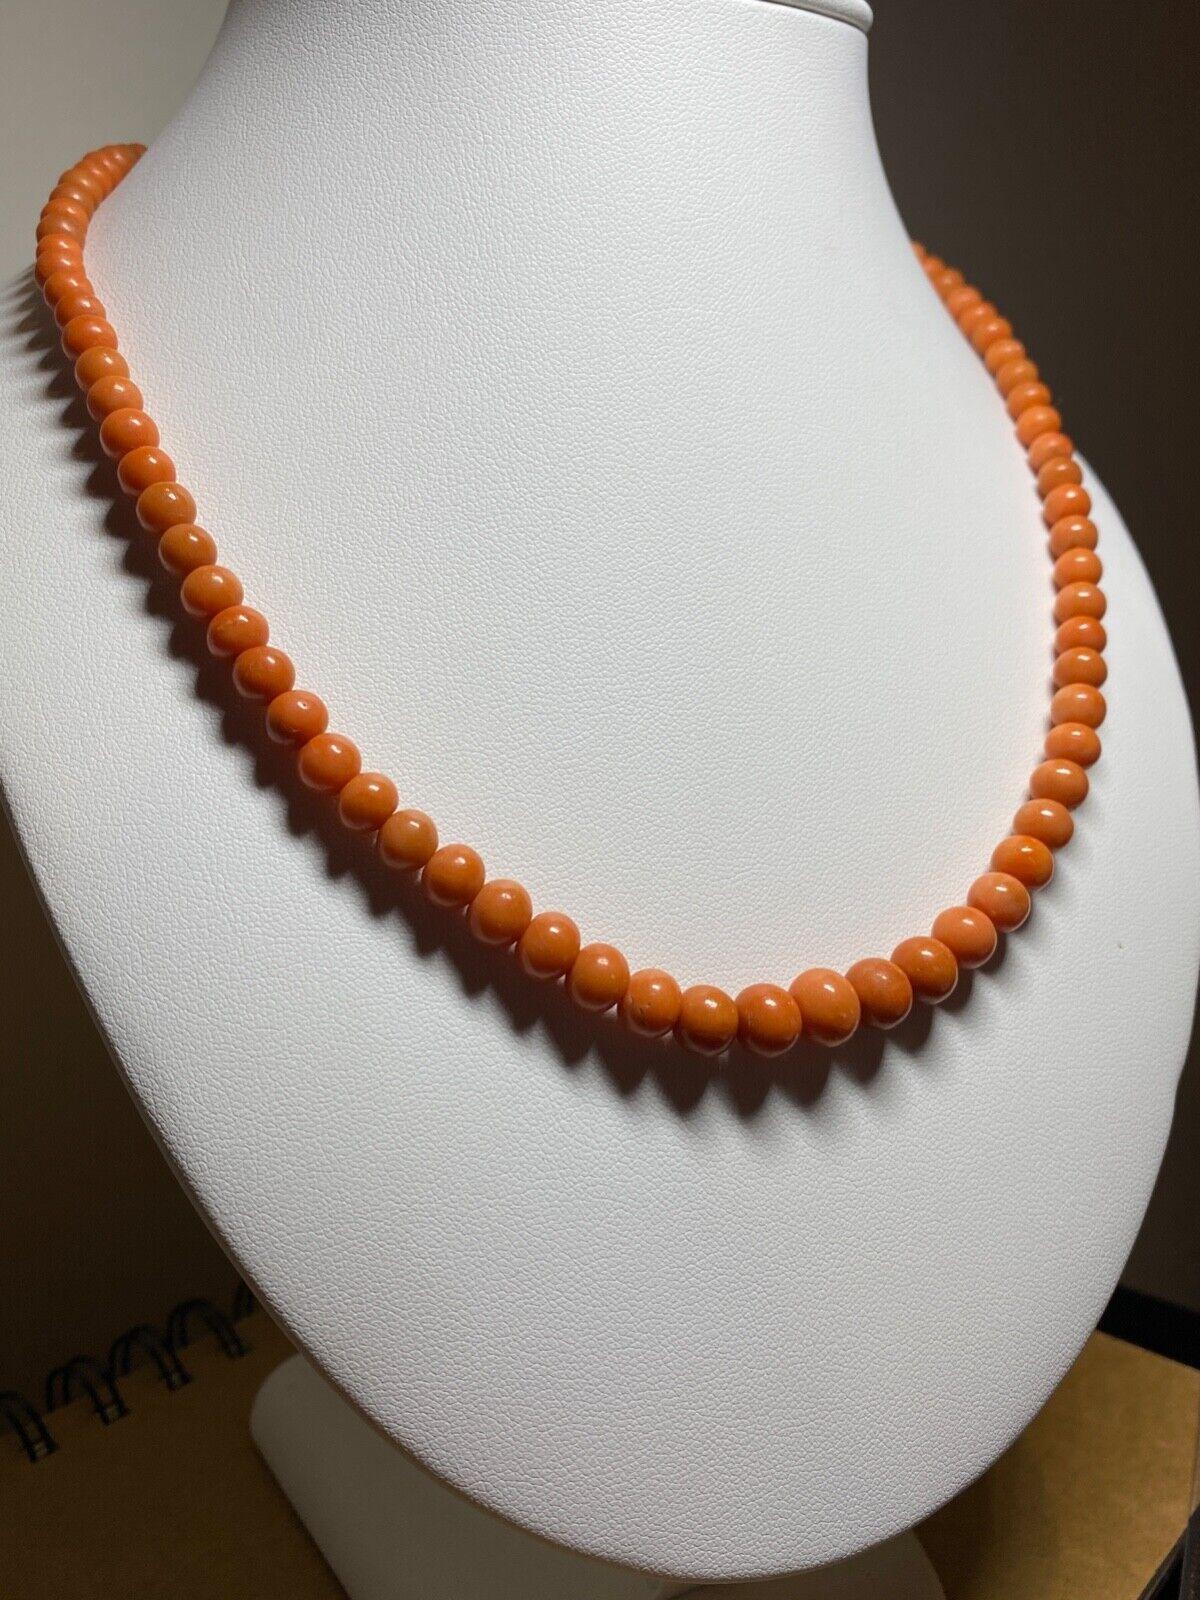 Fine & Rare Natural Salmon Red Coral Bead Necklace I
s dating back to Art-Deco period 

Composed of 87 graduating natural coral beads, 
with the biggest being 10mm x 7.5mm & smallest - 5mm x 4mm 
of stunning natural salmon red colour 

completed by